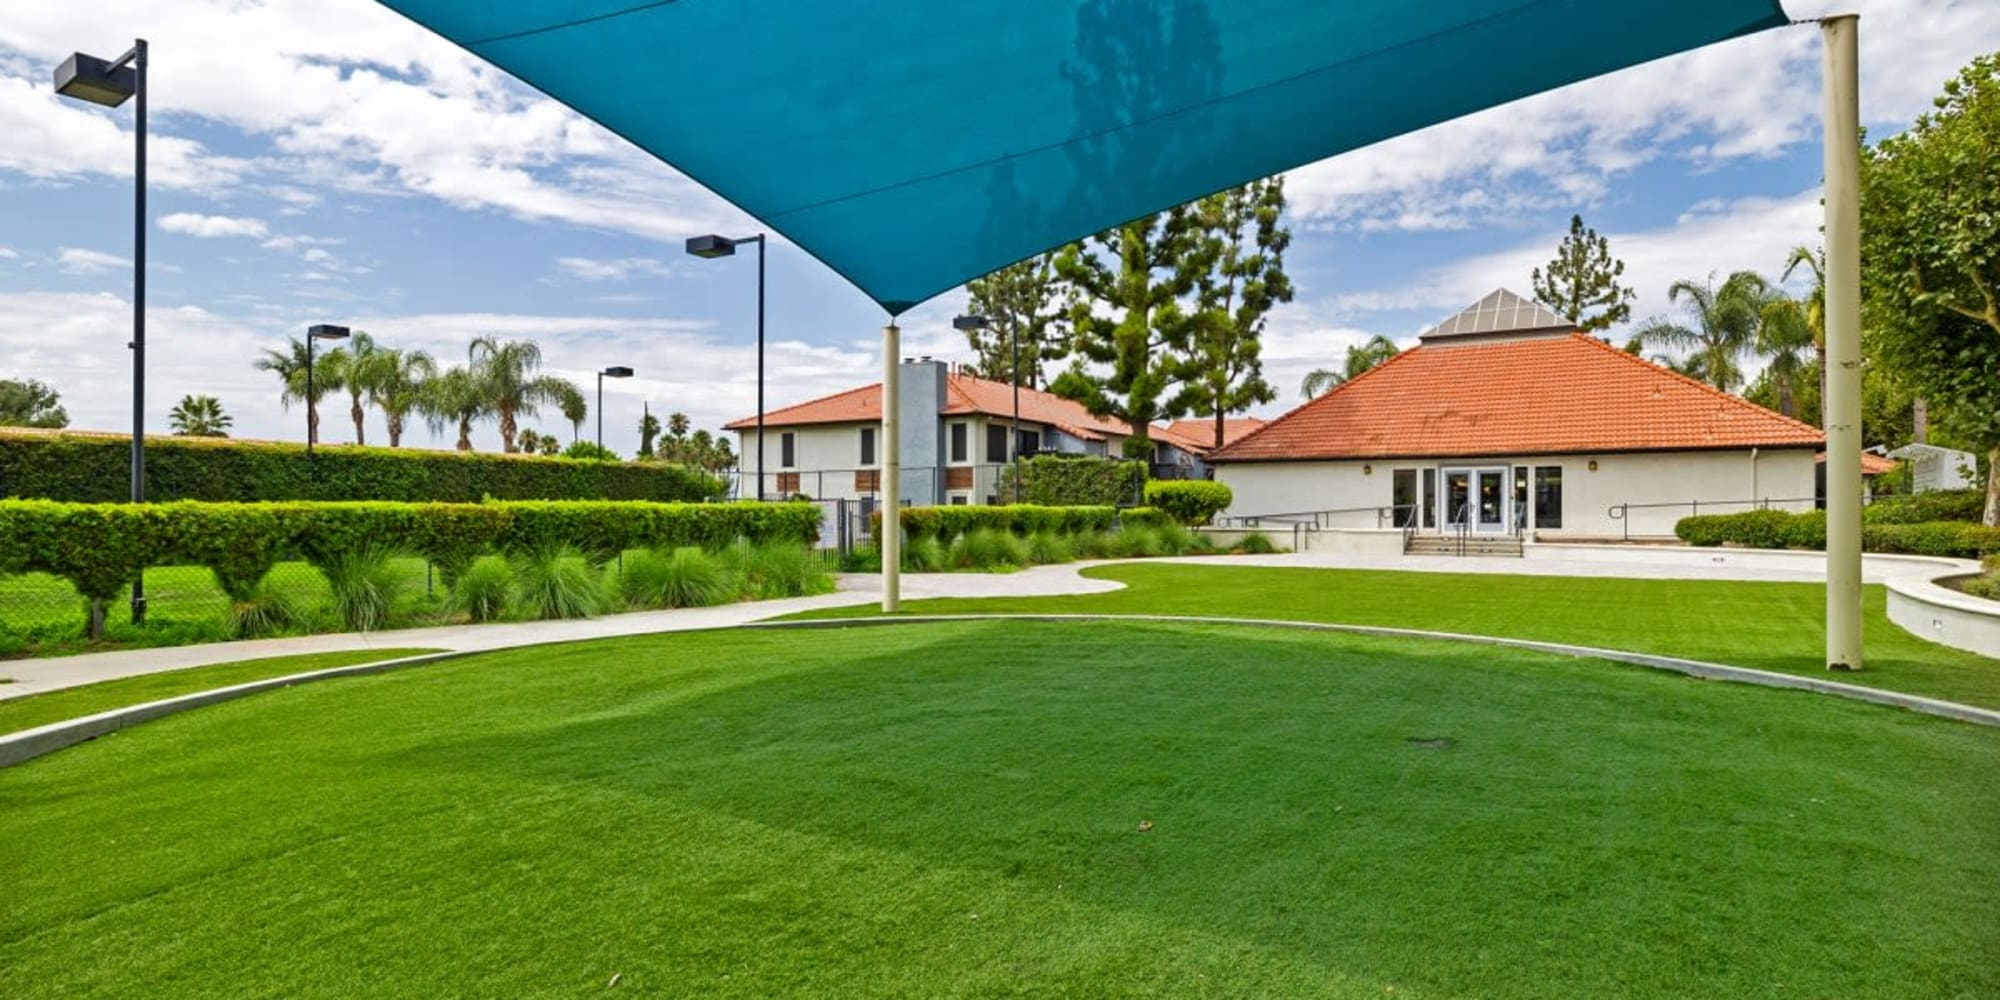 Shaded lawn at Trails at Grand Terrace in Colton, California